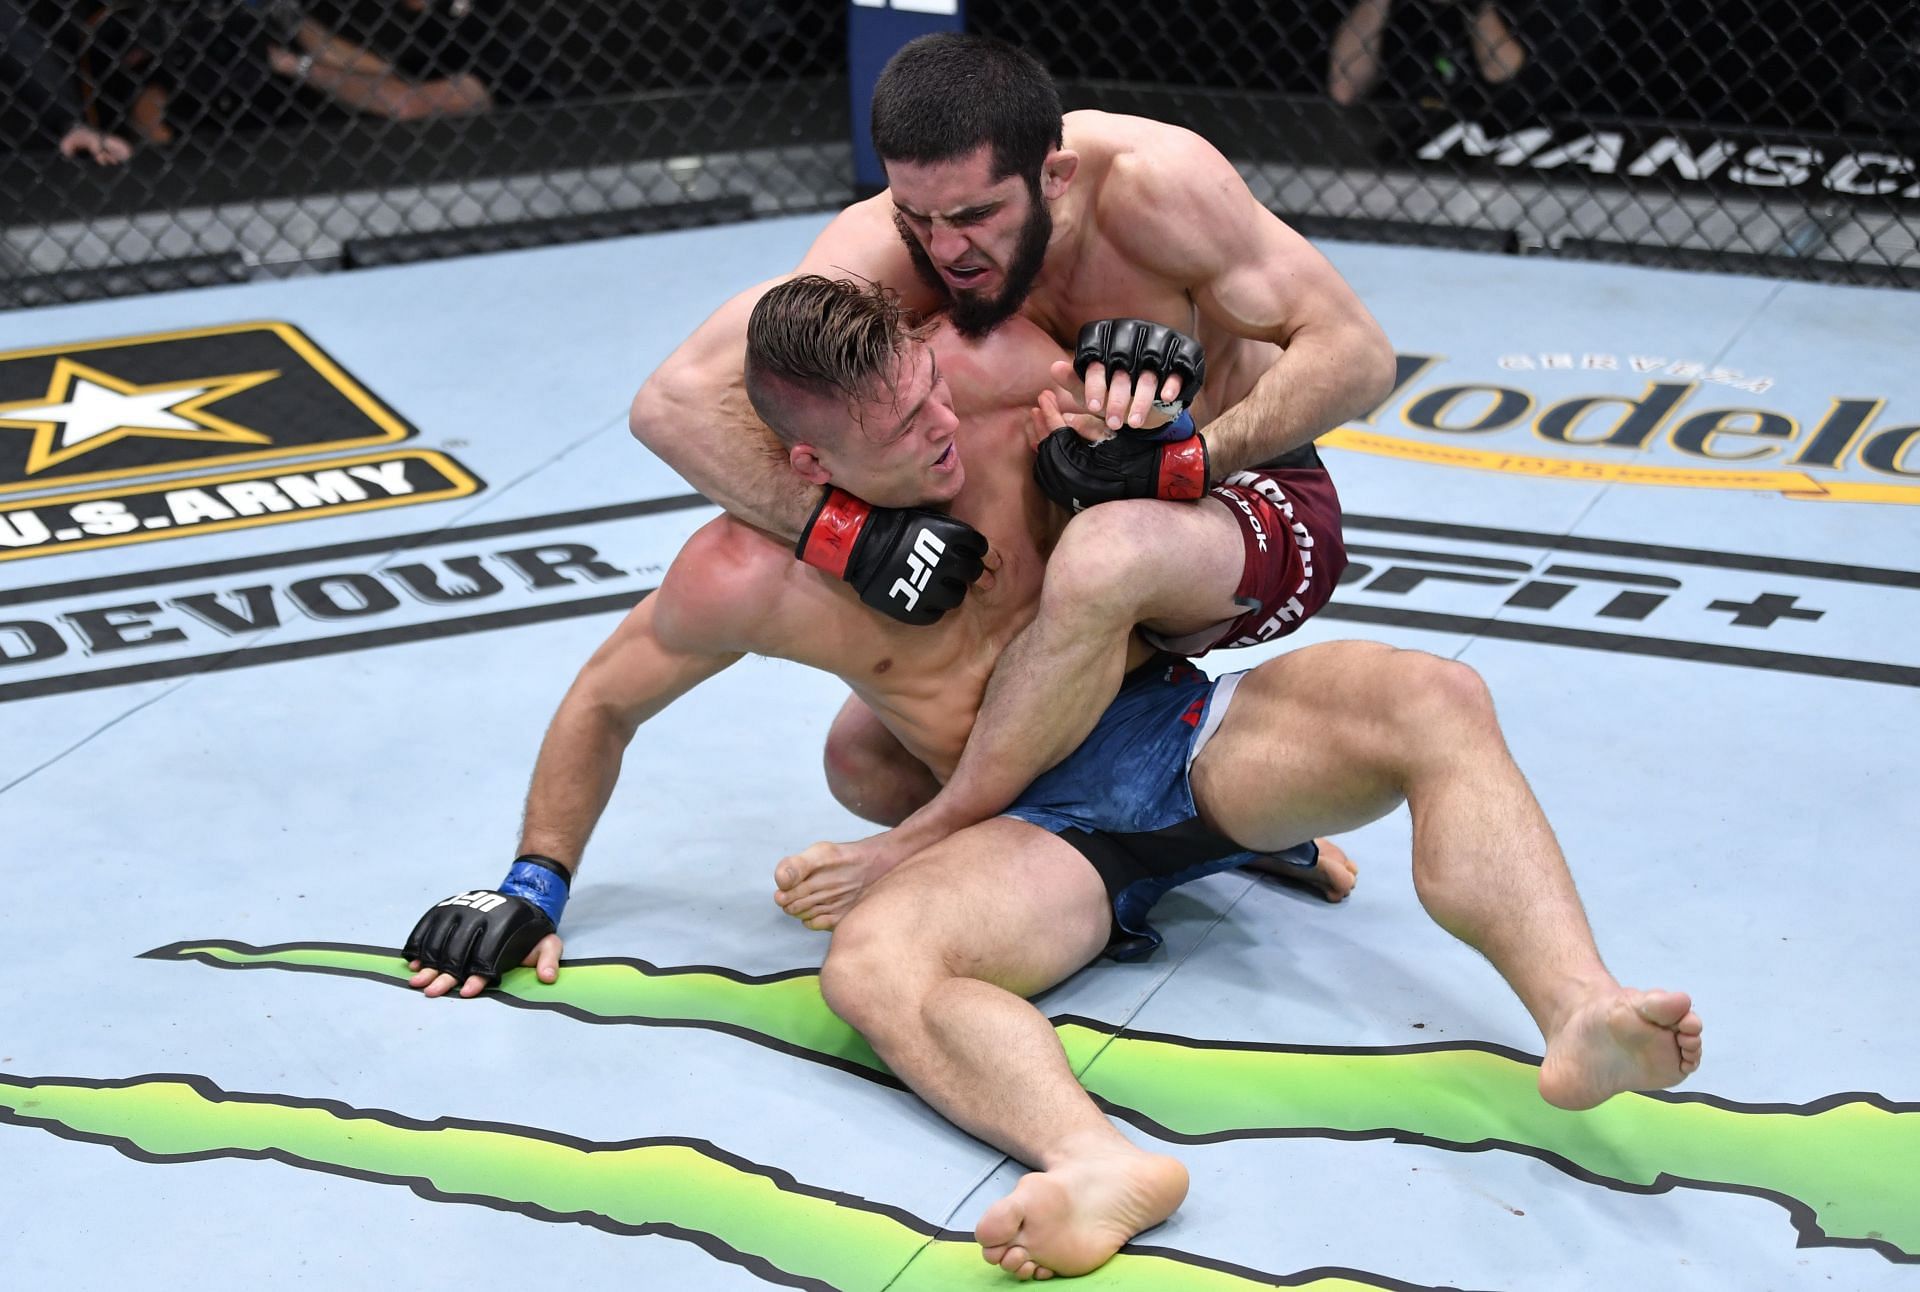 Islam Makhachev&#039;s wrestling skills could give him the advantage over Charles Oliveira